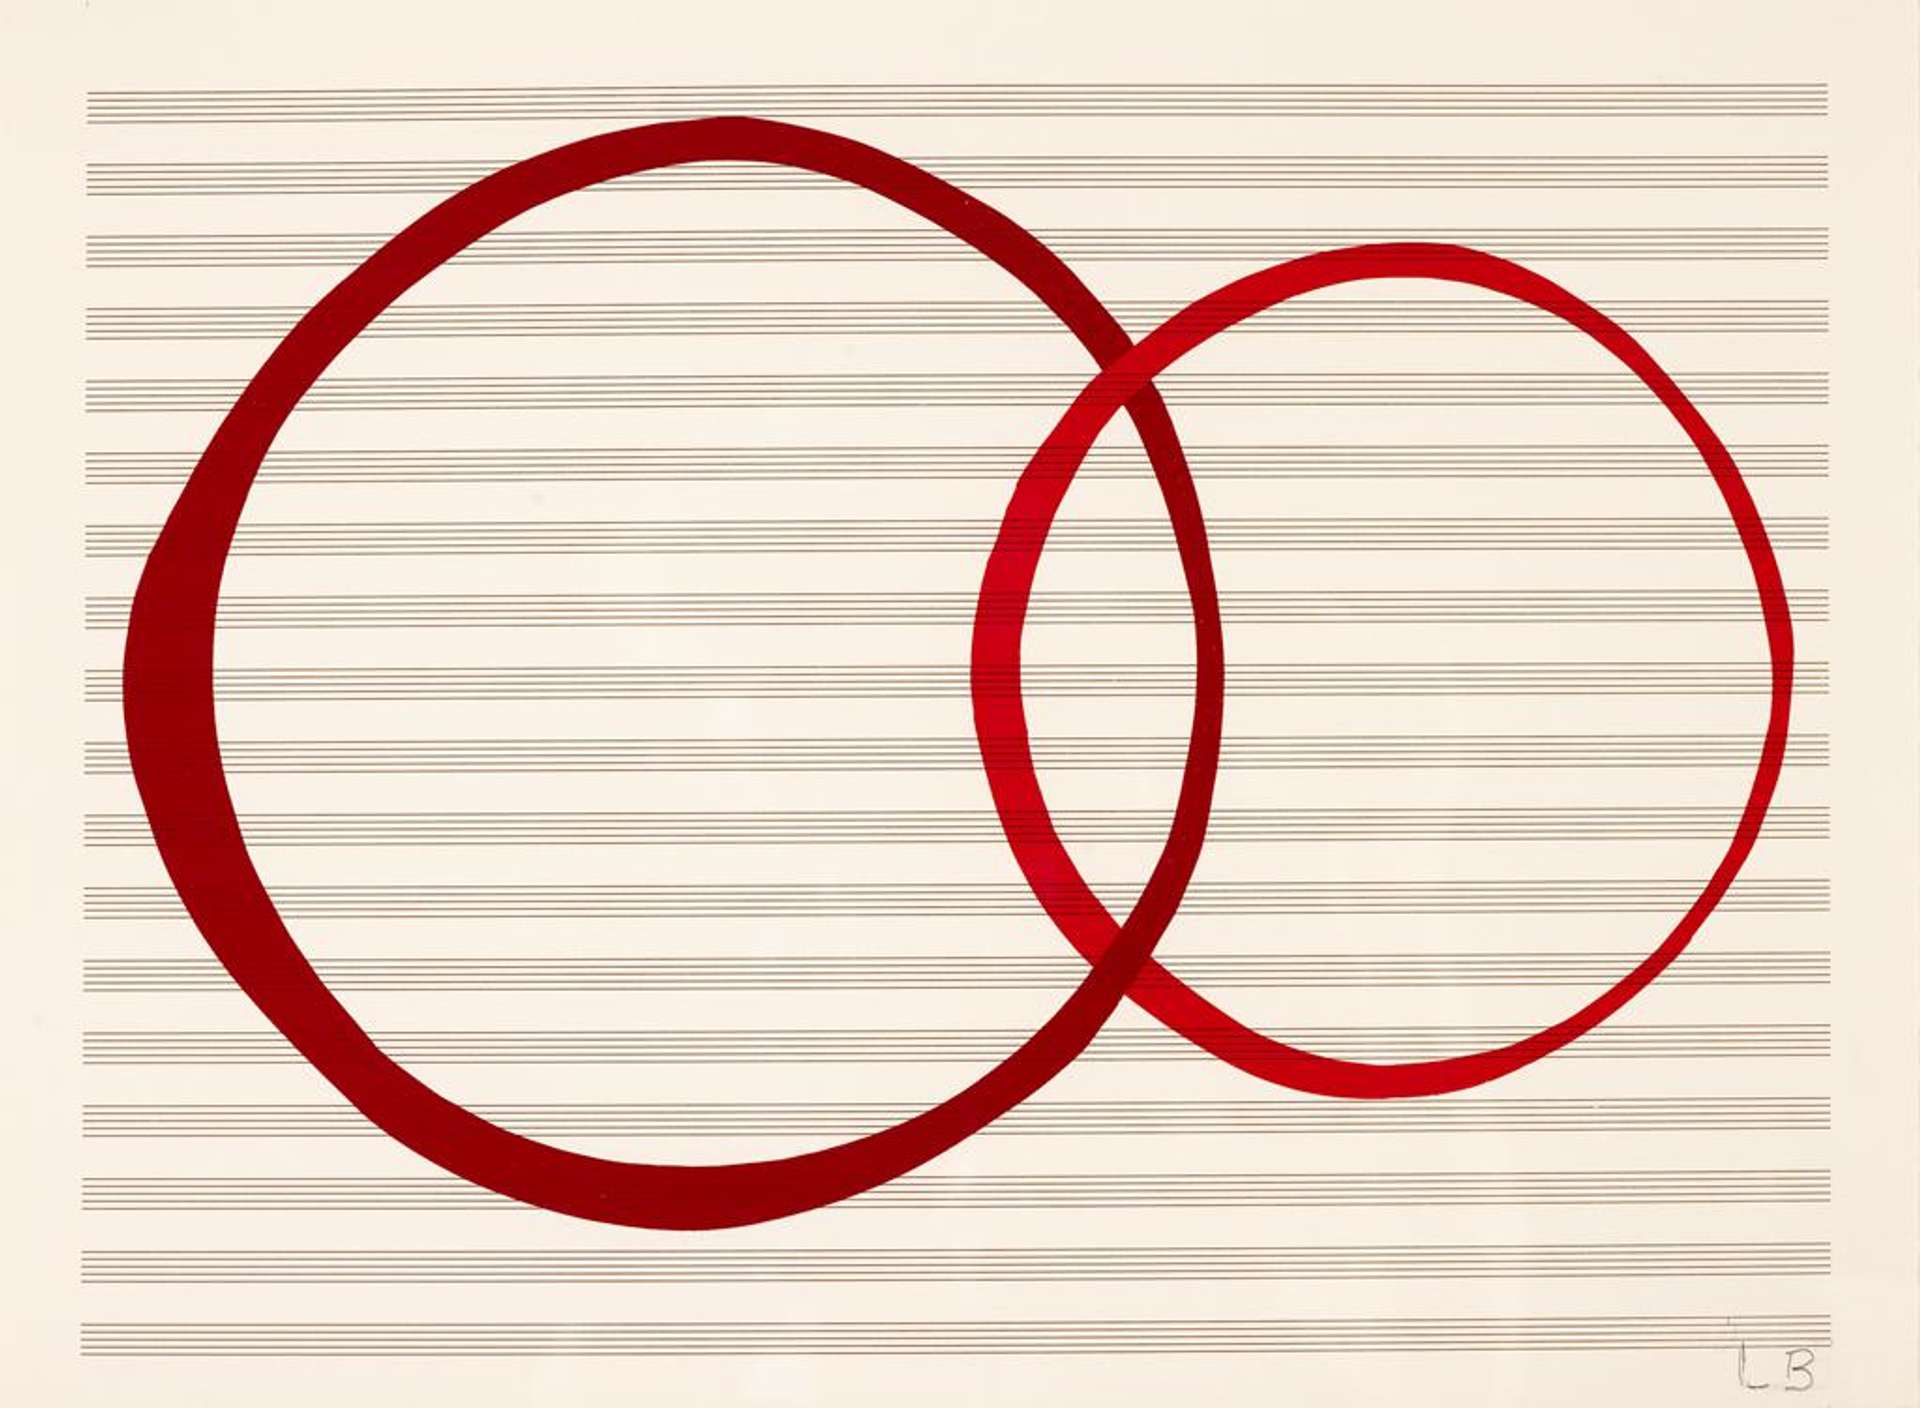  Louise Bourgeois’ Untitled #10. A screenprint of two connected red circles against a sheet of horizontal lines.